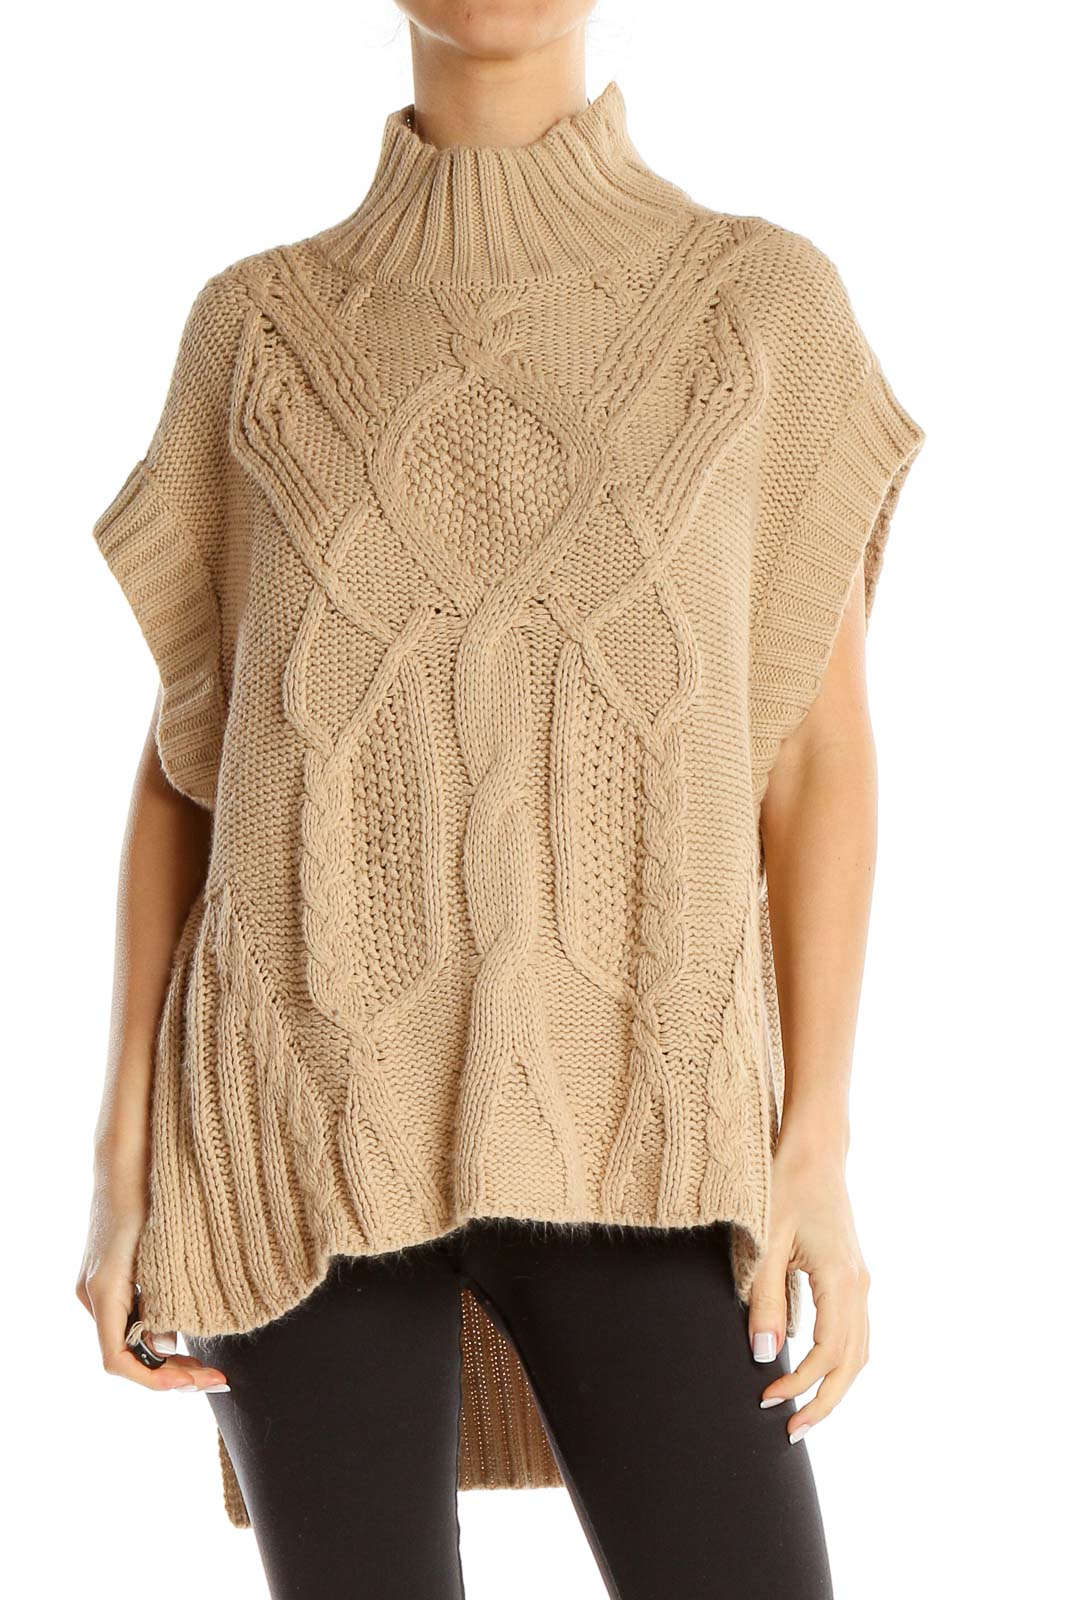 Tan Cable-knit All Day Wear Sweater Vest Front